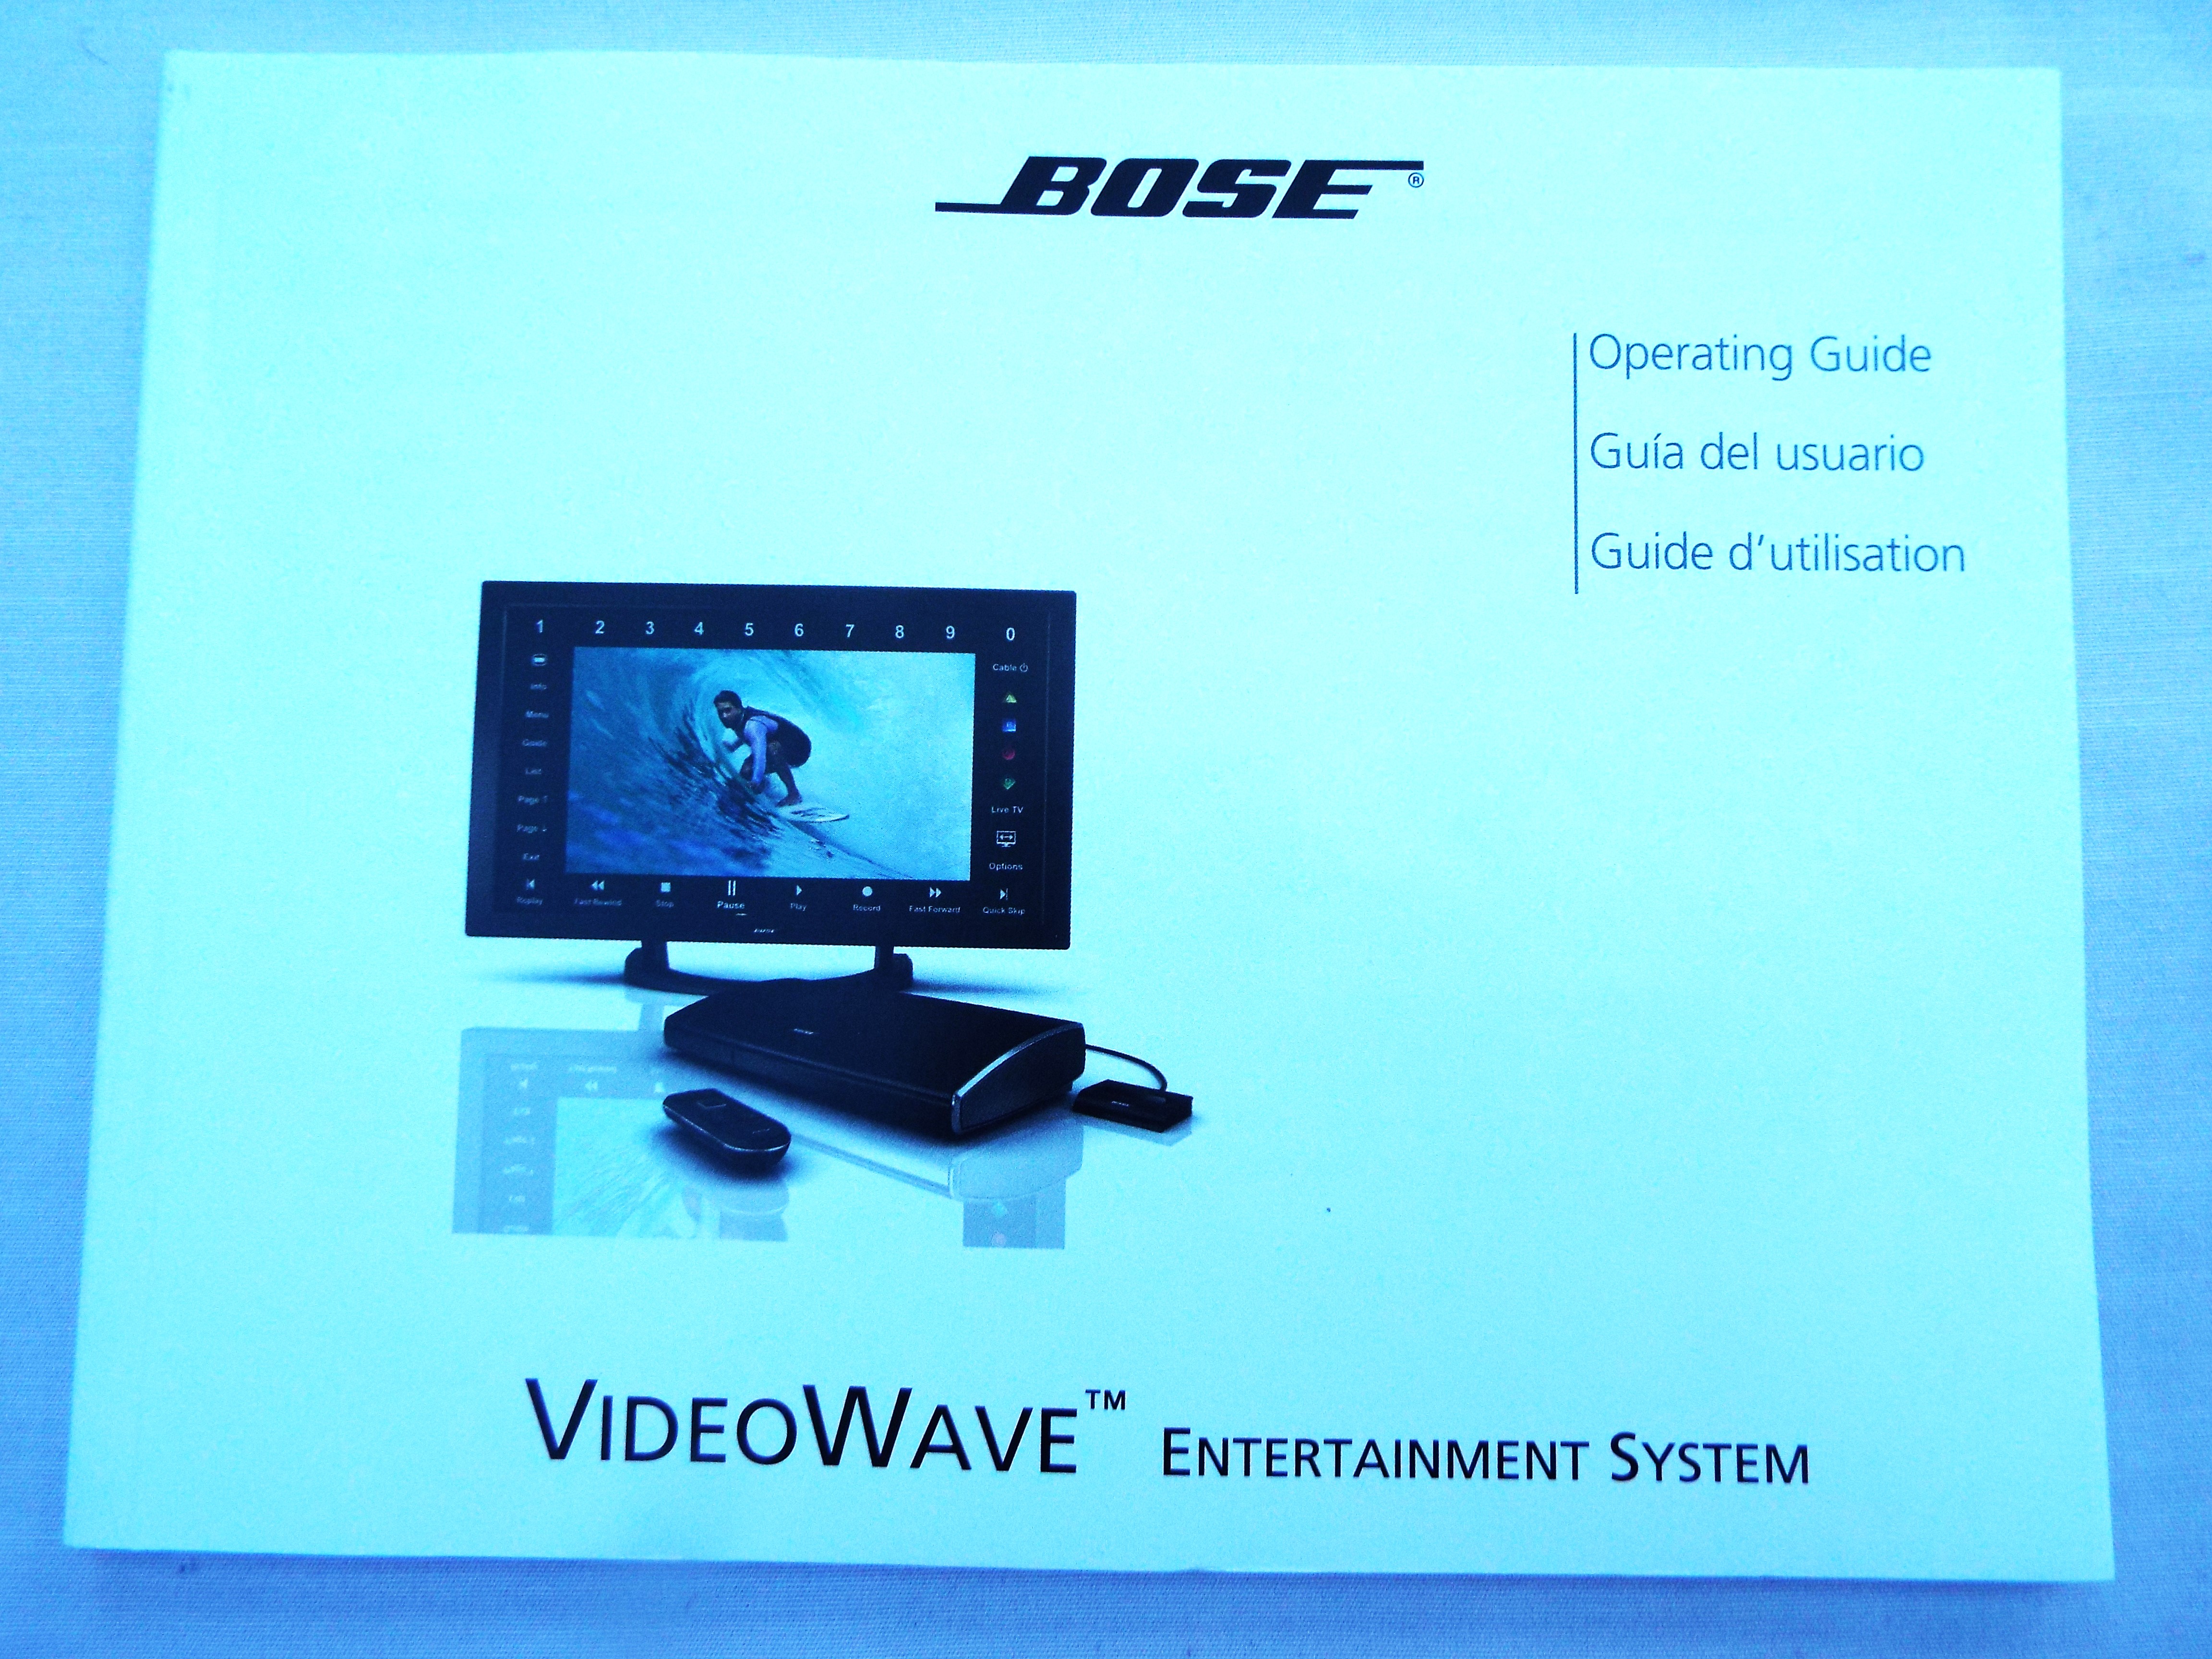 Bose VideoWave Entertainment System - an - Image 4 of 5